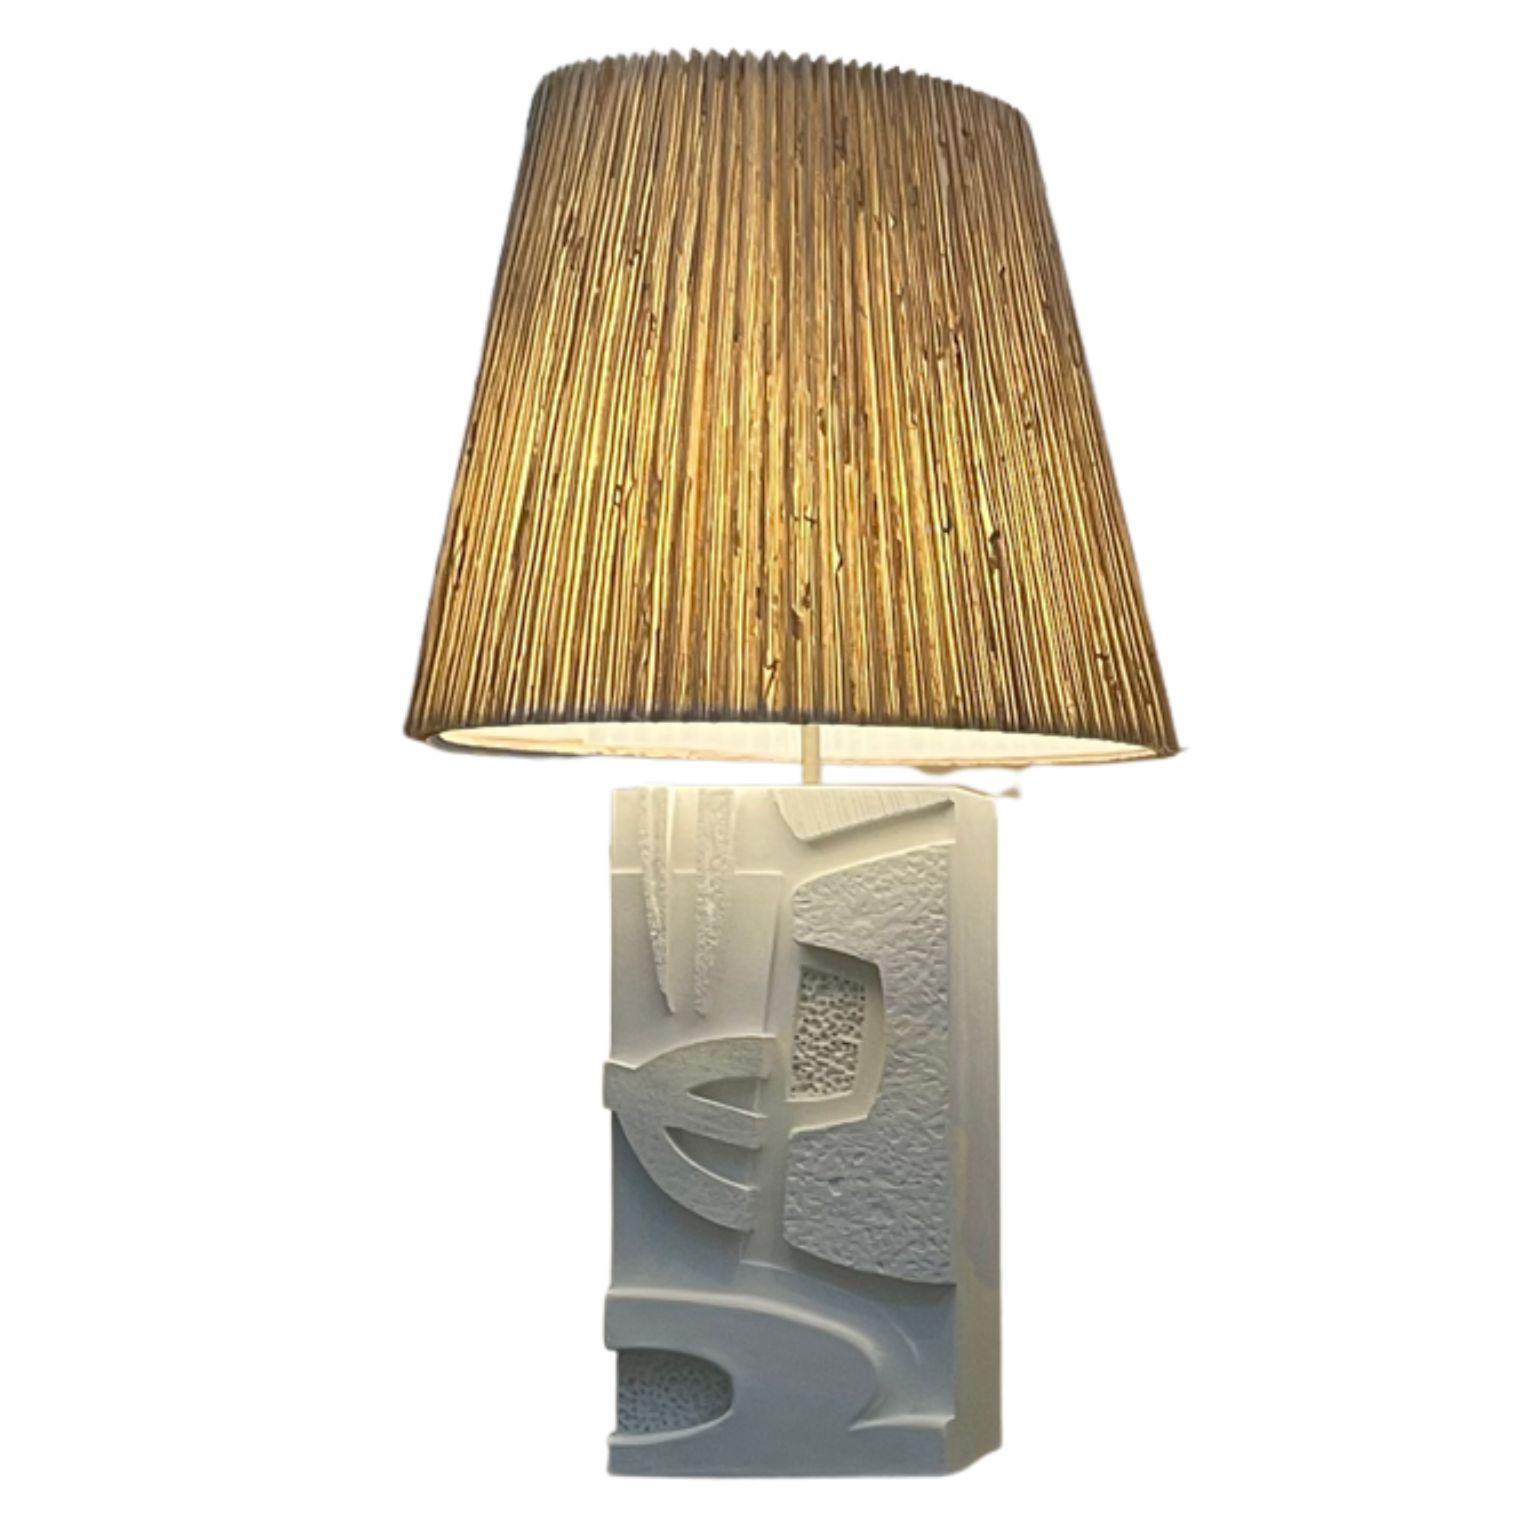 Pêle-Mêle Complementary Table Lamp 2 by Daniel Schneiger
One of a Kind.
Dimensions: D 15,3 x W 23 x H 45,8 cm.
Materials: Cast from gypsum plaster.

This lamp is part of a complementary pair inspired by the collages of Matisse, hence the name,